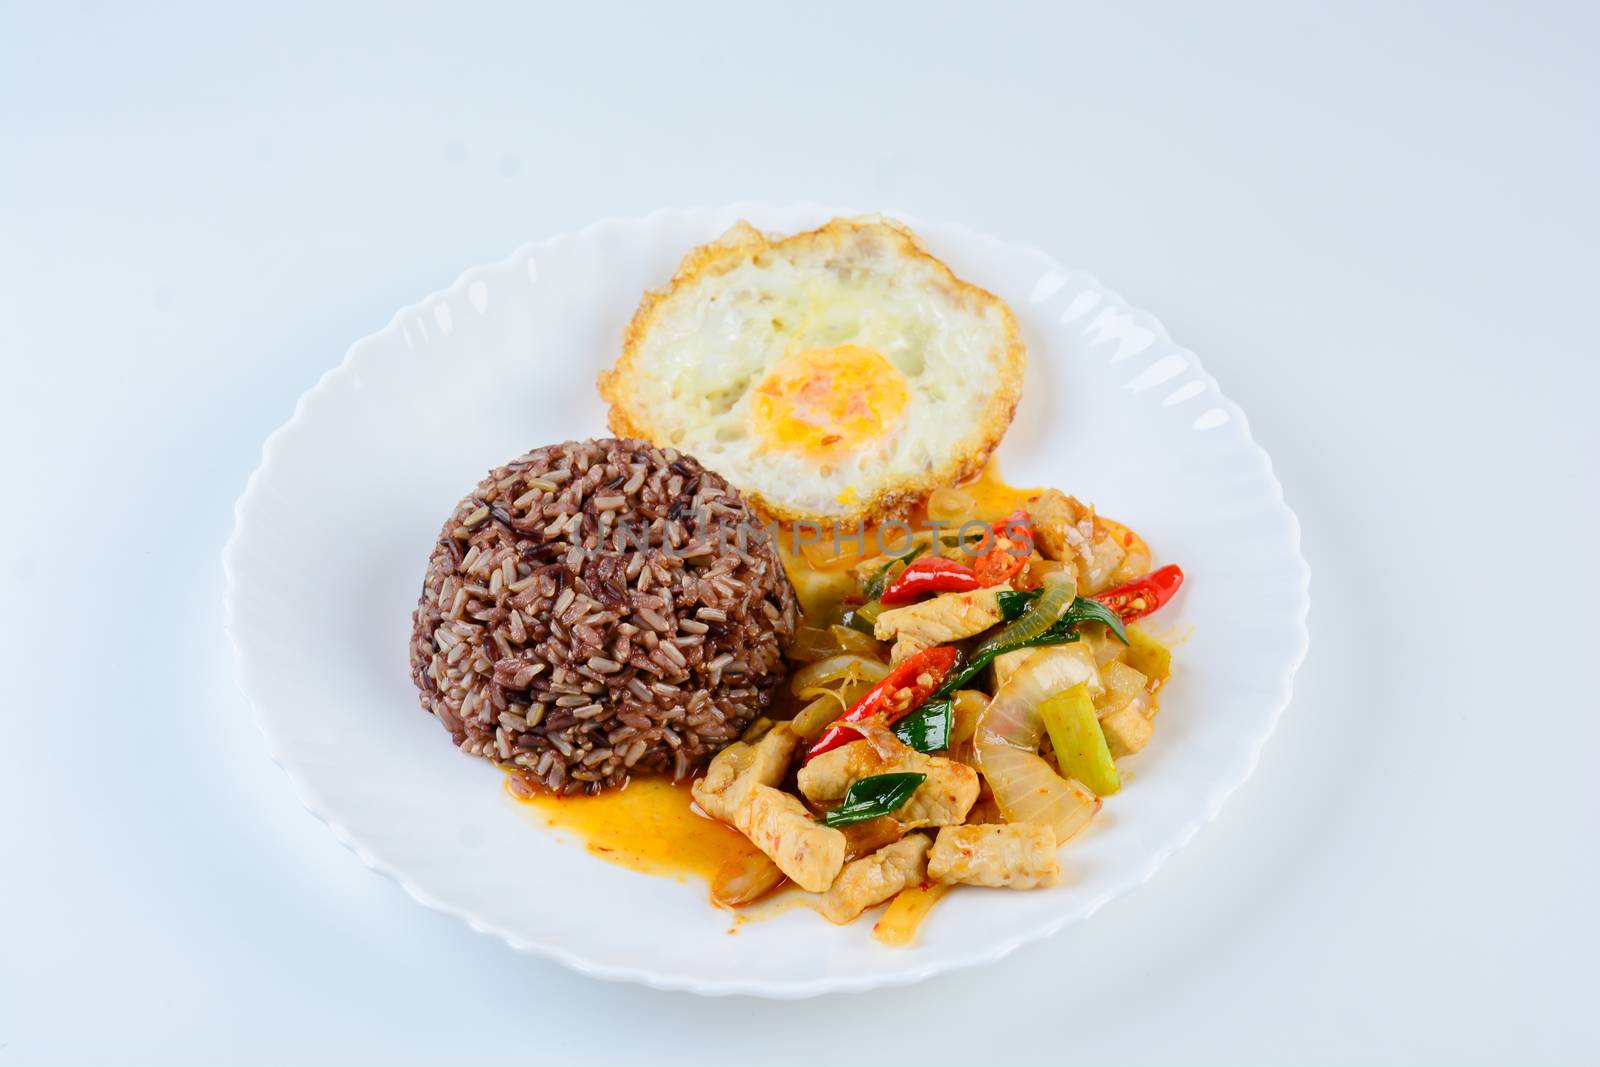 Stir fry chicken sweet onion and peppers, served with brown rice and fried egg on white plate
